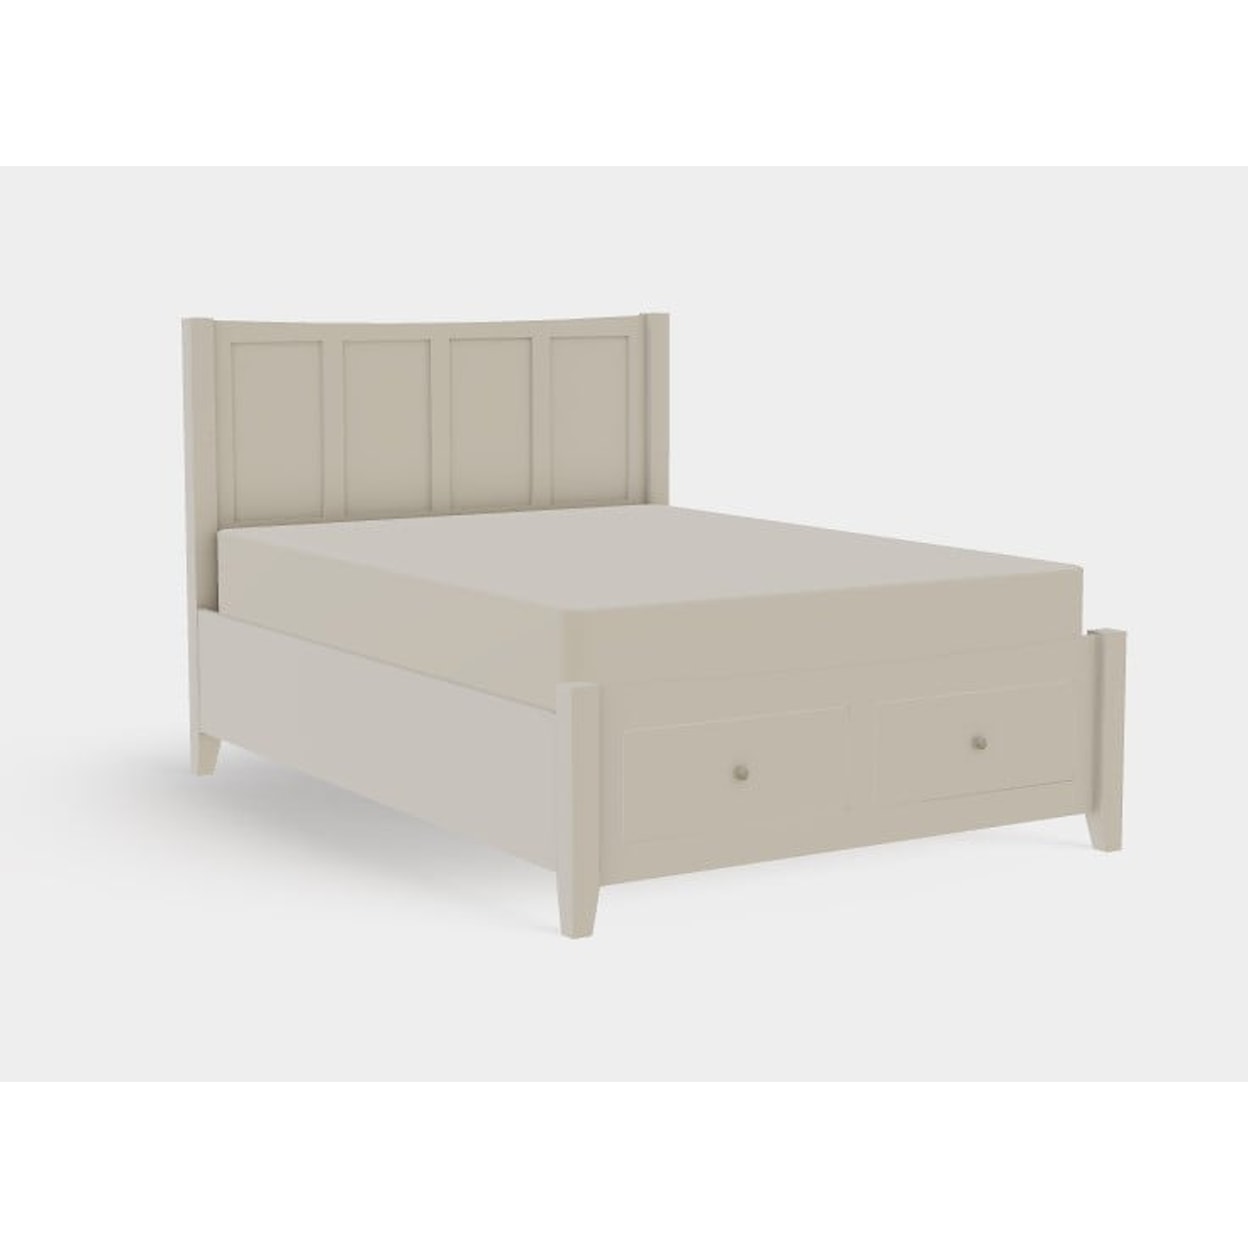 Mavin Atwood Group Atwood Queen Footboard Storage Panel Bed